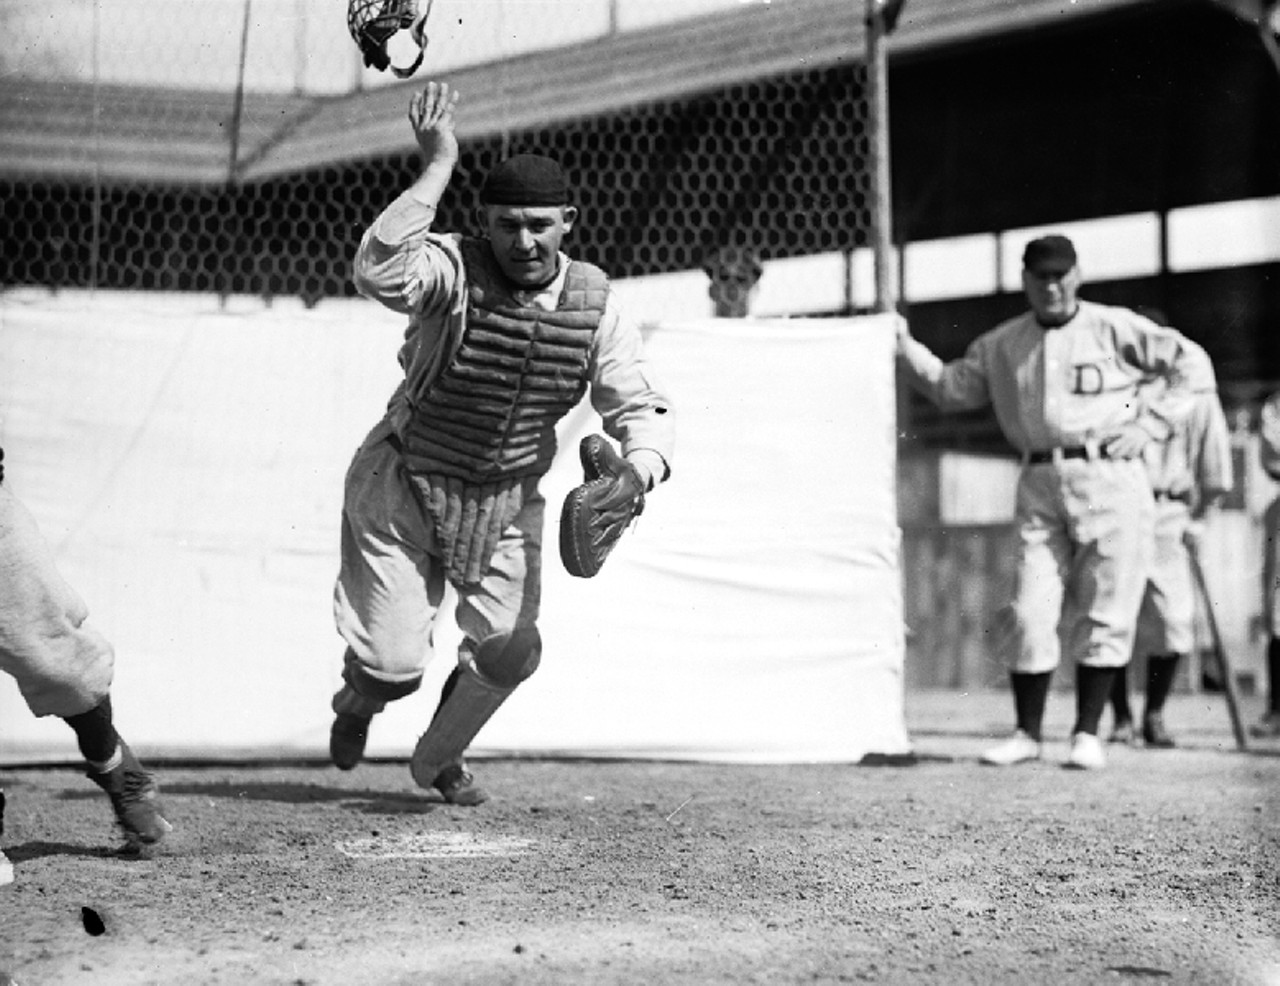 Catcher Oscar Stanage flips off his mask to chase a ball at Navin Field in the 1920s.